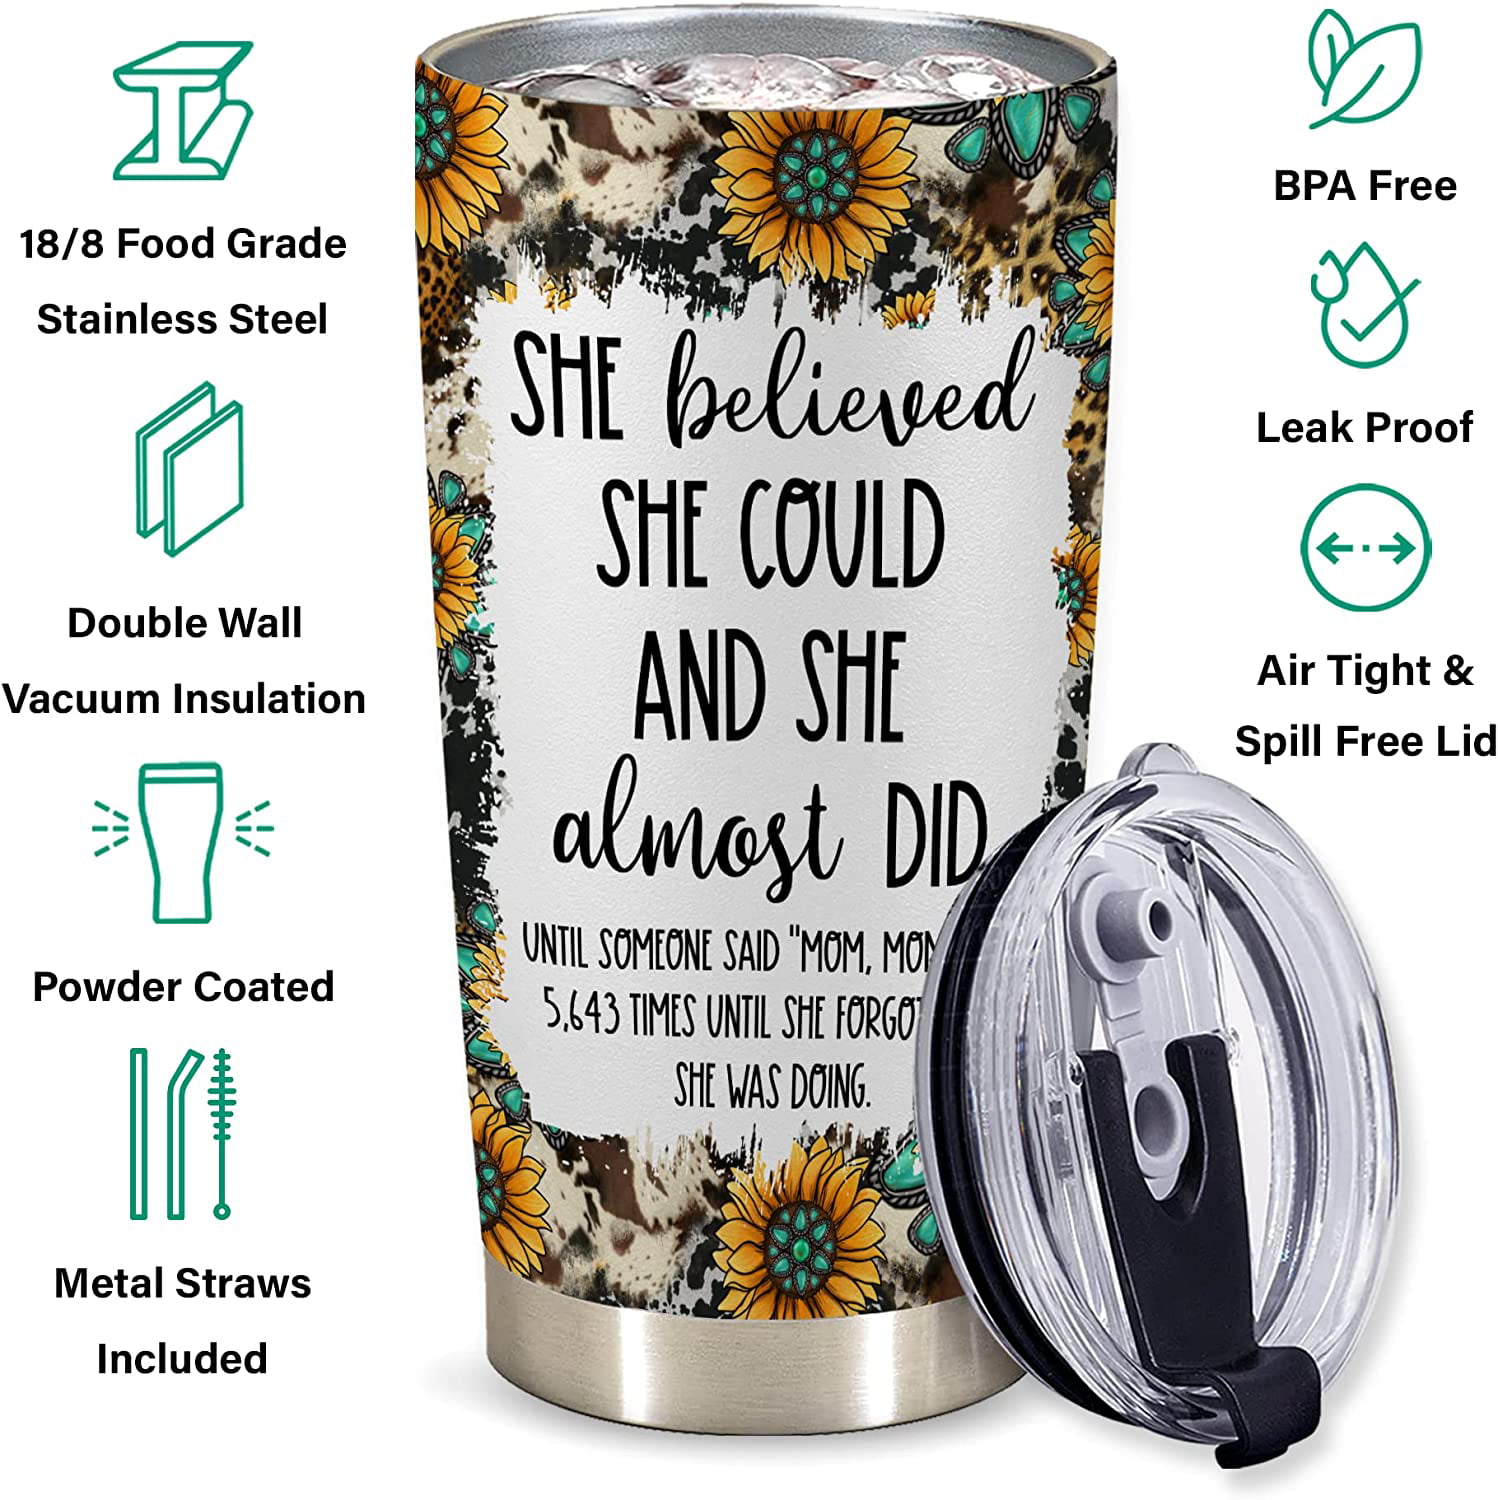 Children's stainless steel cups recalled due to presence of lead - ReachFM:  Peace Country's hub for local and Christian news, and adult contemporary  Christian programming.